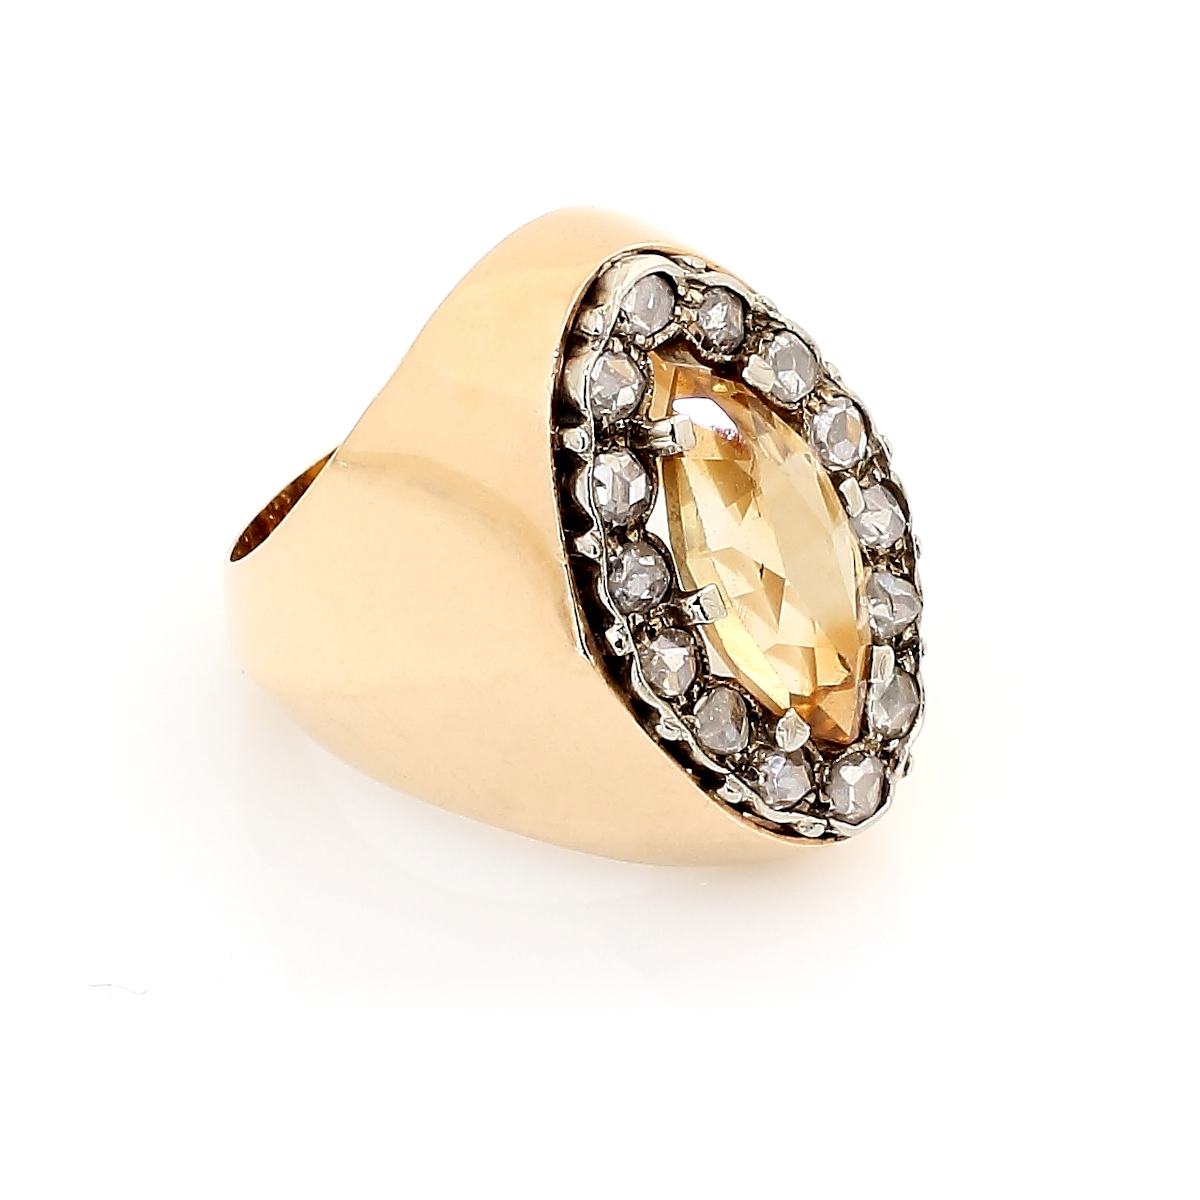 Vintage Gold Ring with Diamonds and Topaz